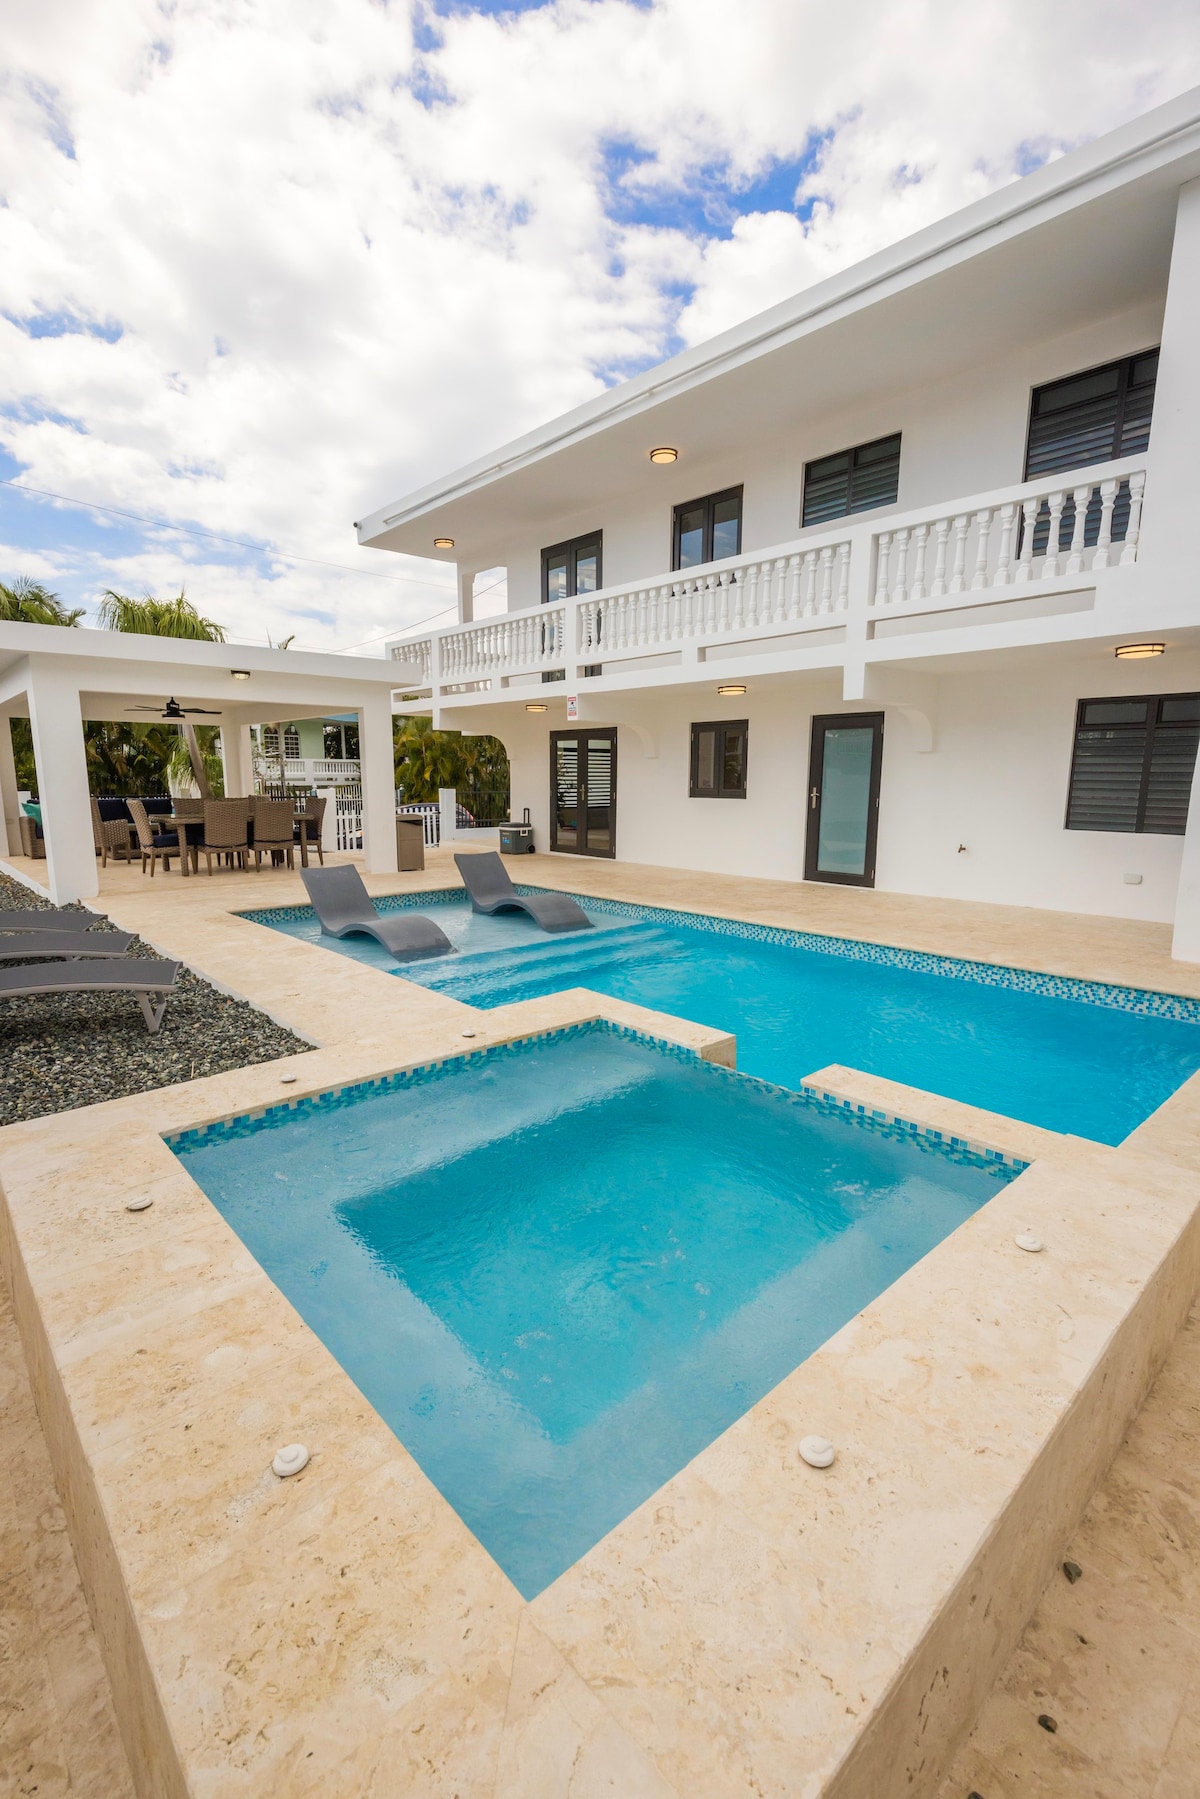 Modern Duplex with Heated Pool - Close to Beaches!